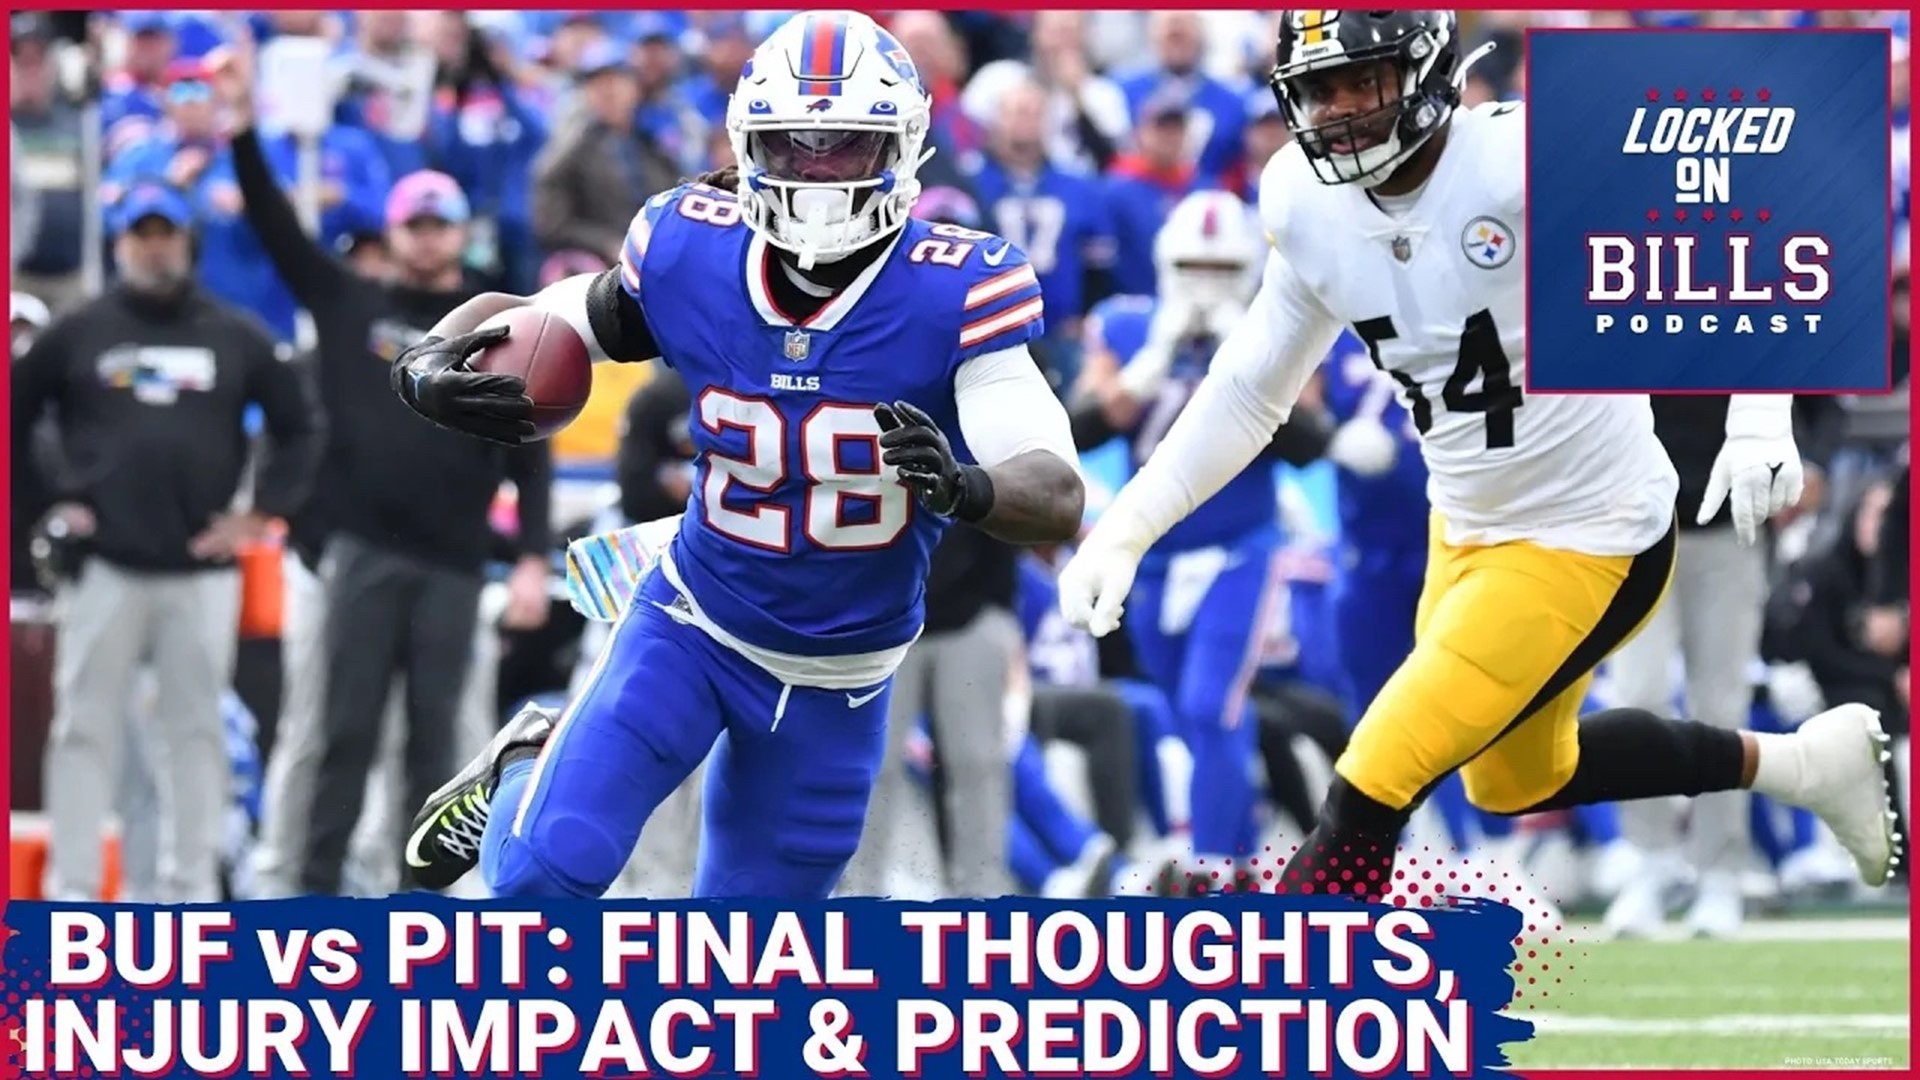 The Buffalo Bills are at home for the Super Wild Card round of the NFL Playoffs to host the Pittsburgh Steelers.